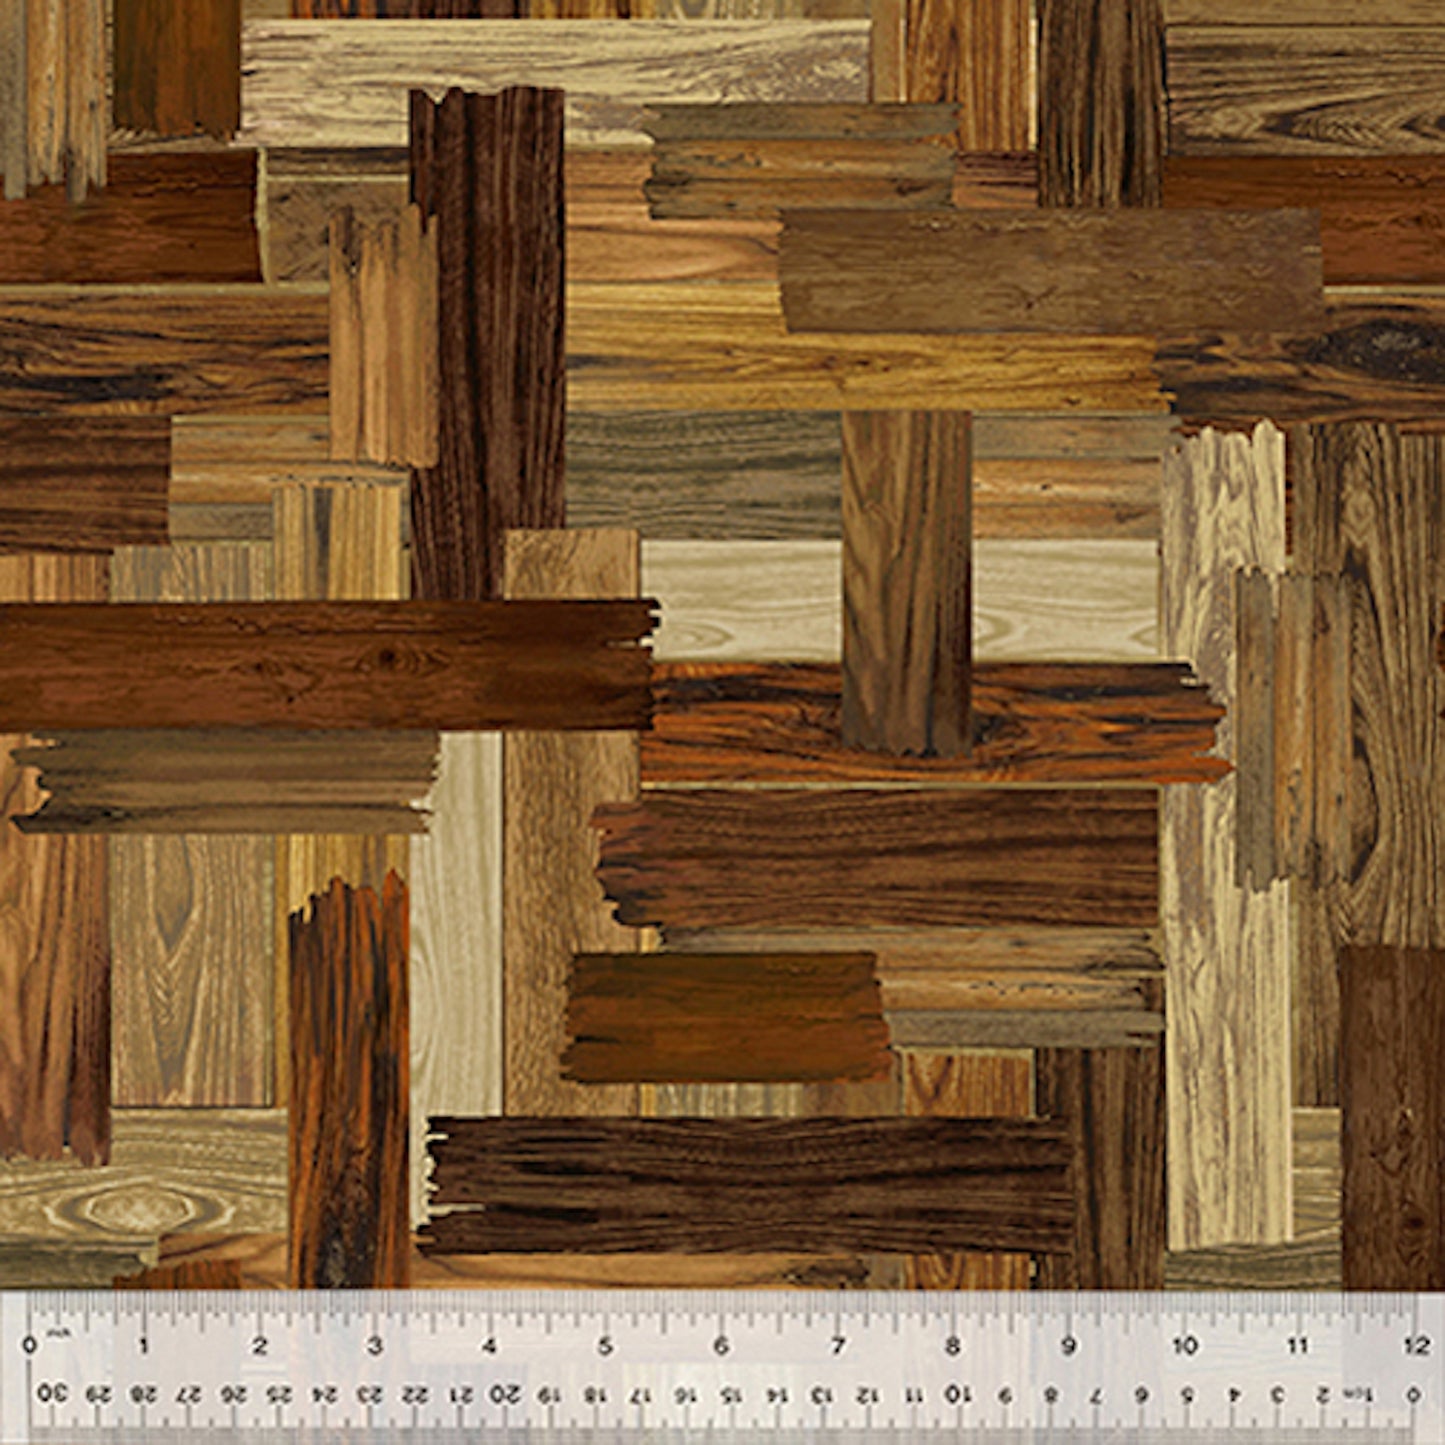 Wood Planks 108" Quilt Backing: Sold by the 1/2 yard.